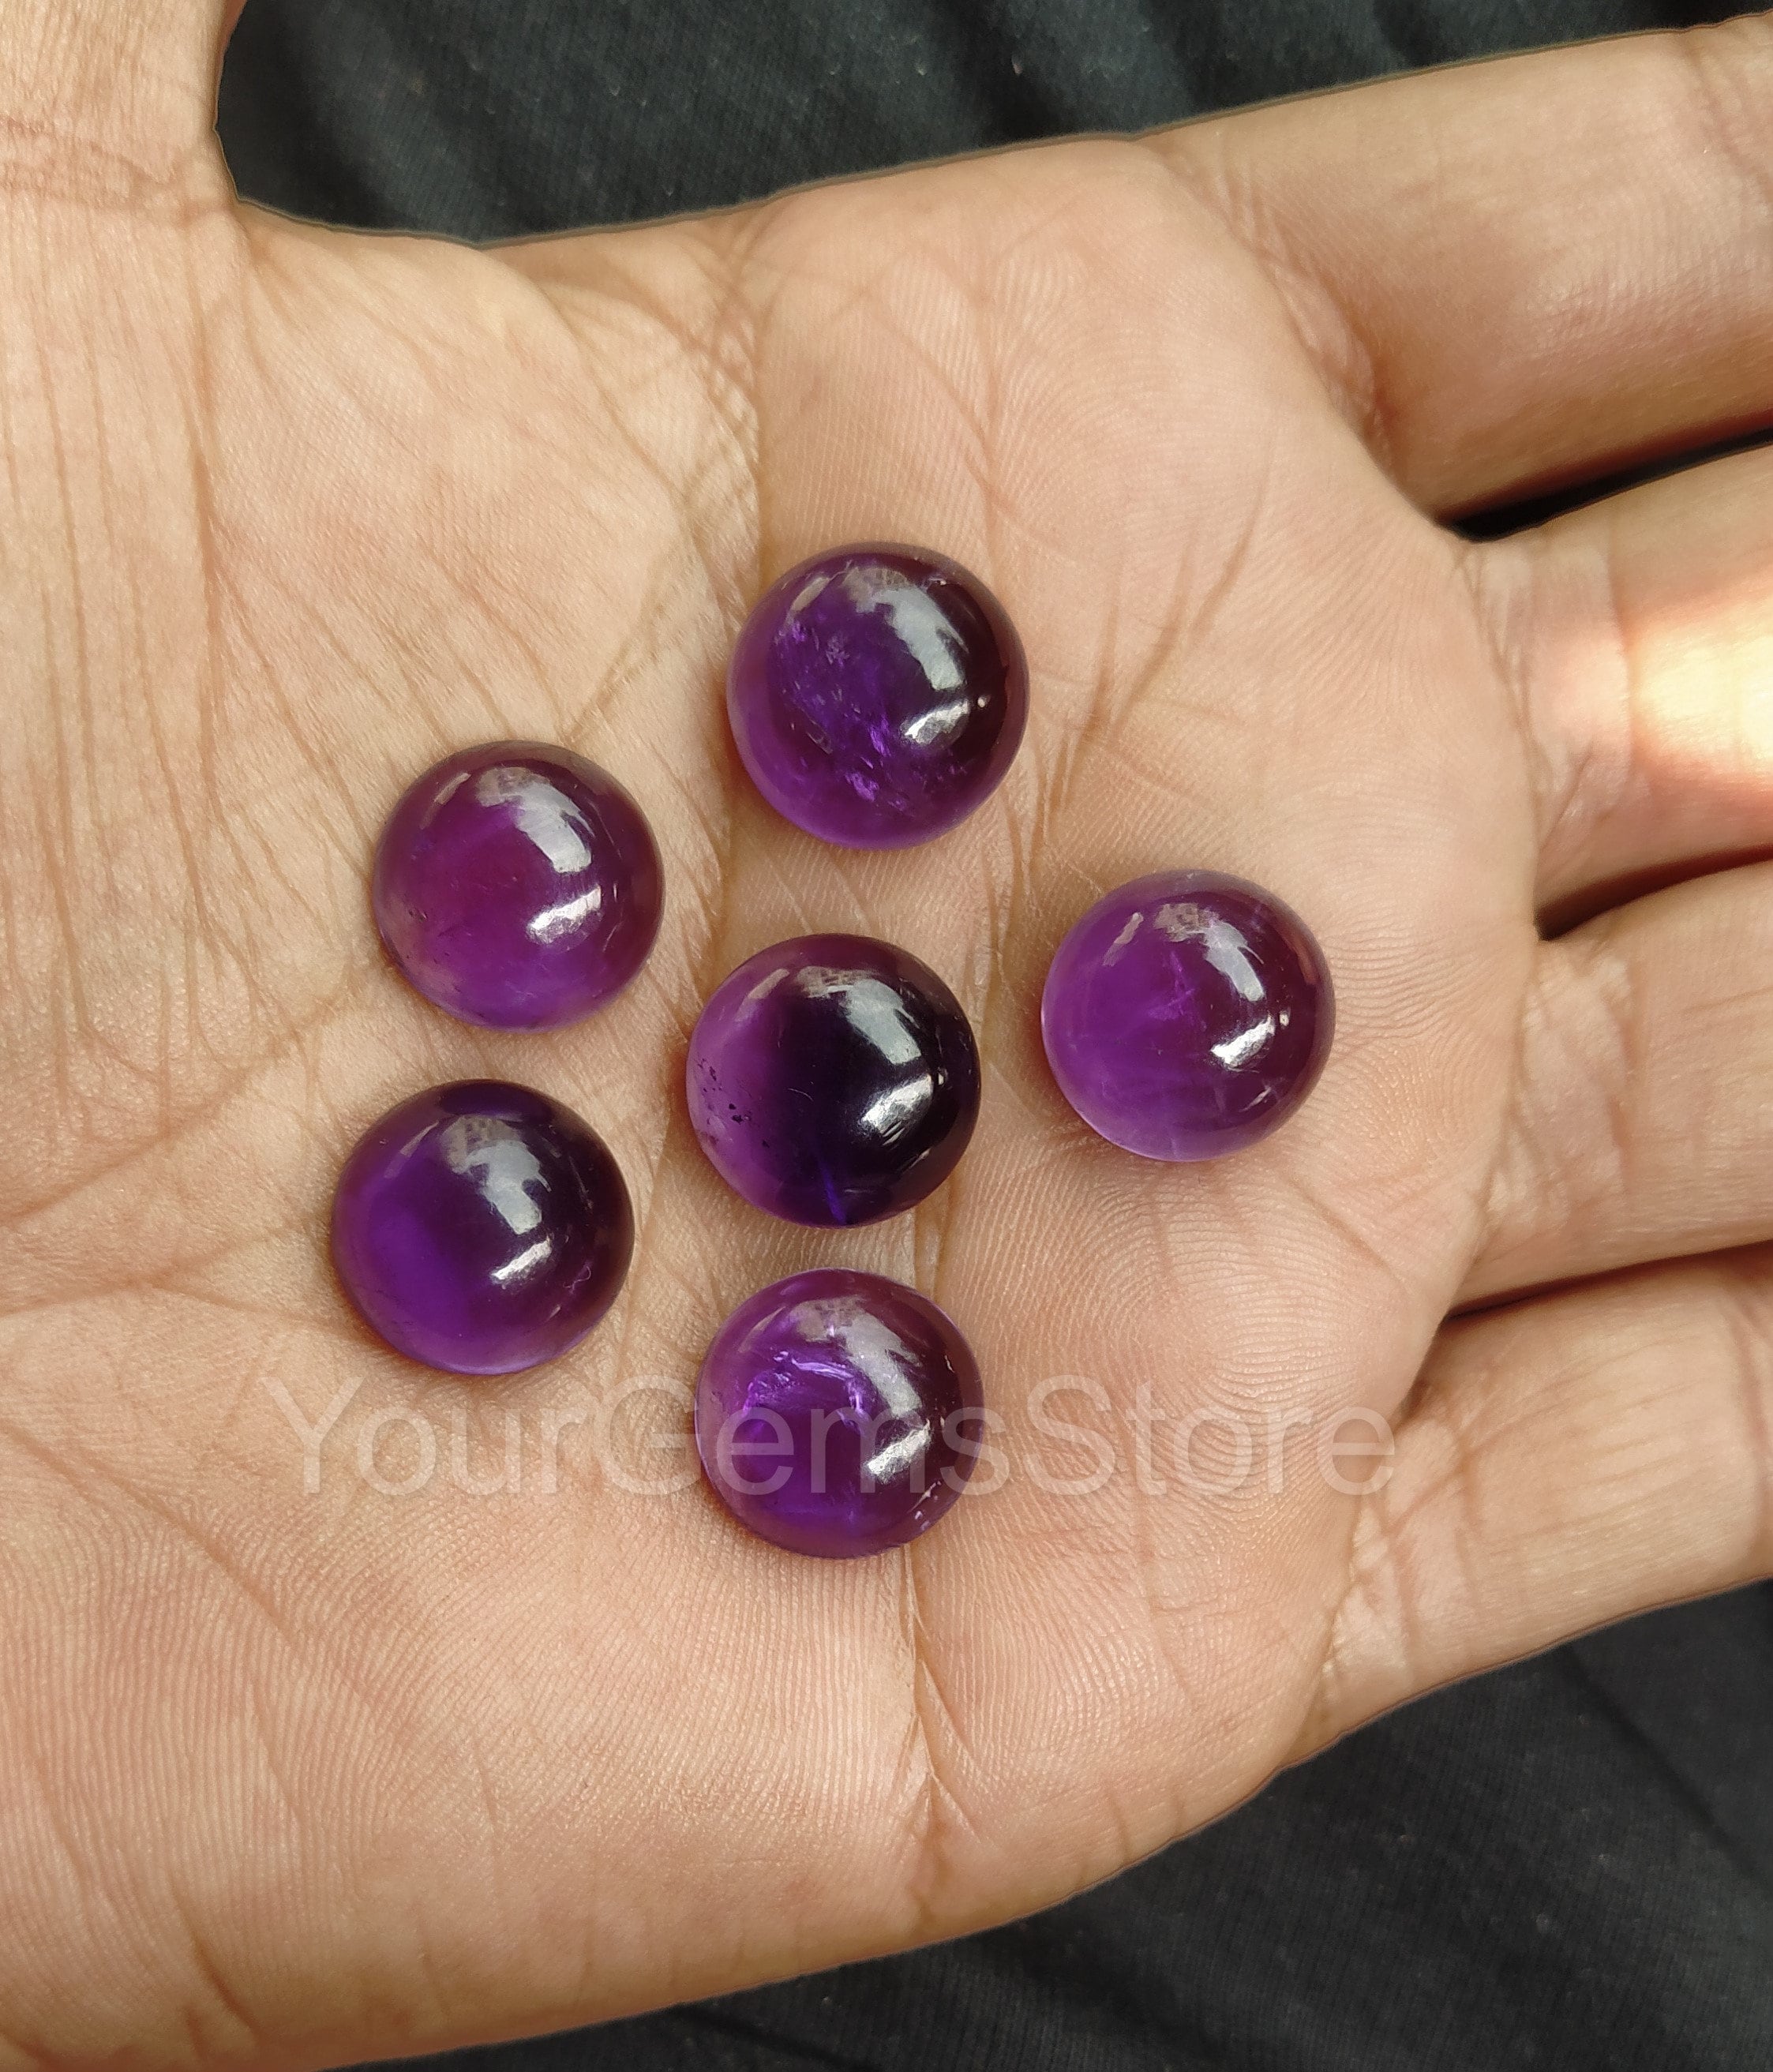 AAA Quality 10 Piece Natural Amethyst 10 MM Cushion Cabochon Gemstone Calibrated 